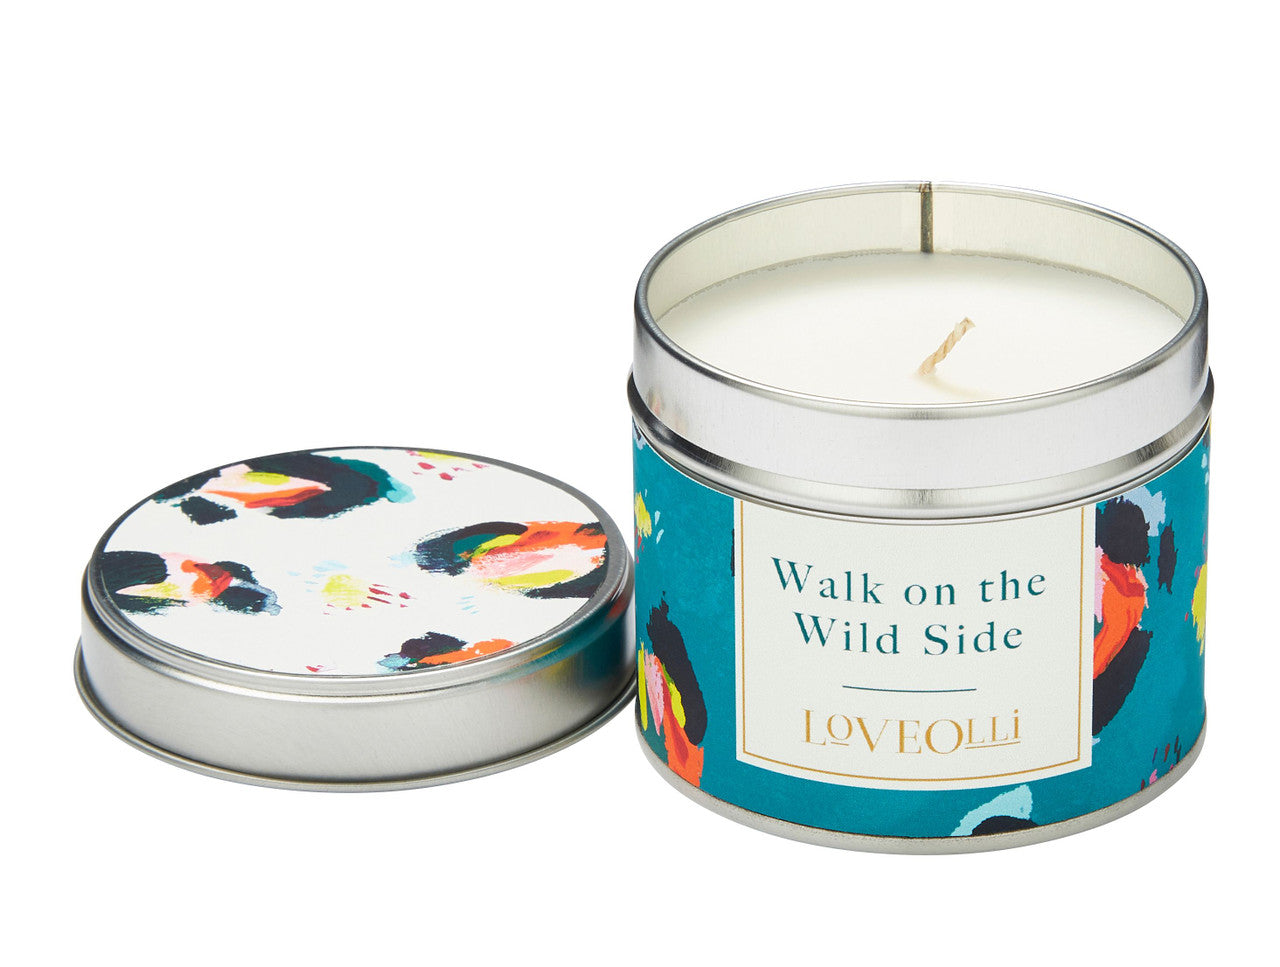 Love Olli Walk on the Wild Side scented tin candle. Hand poured in the UK.